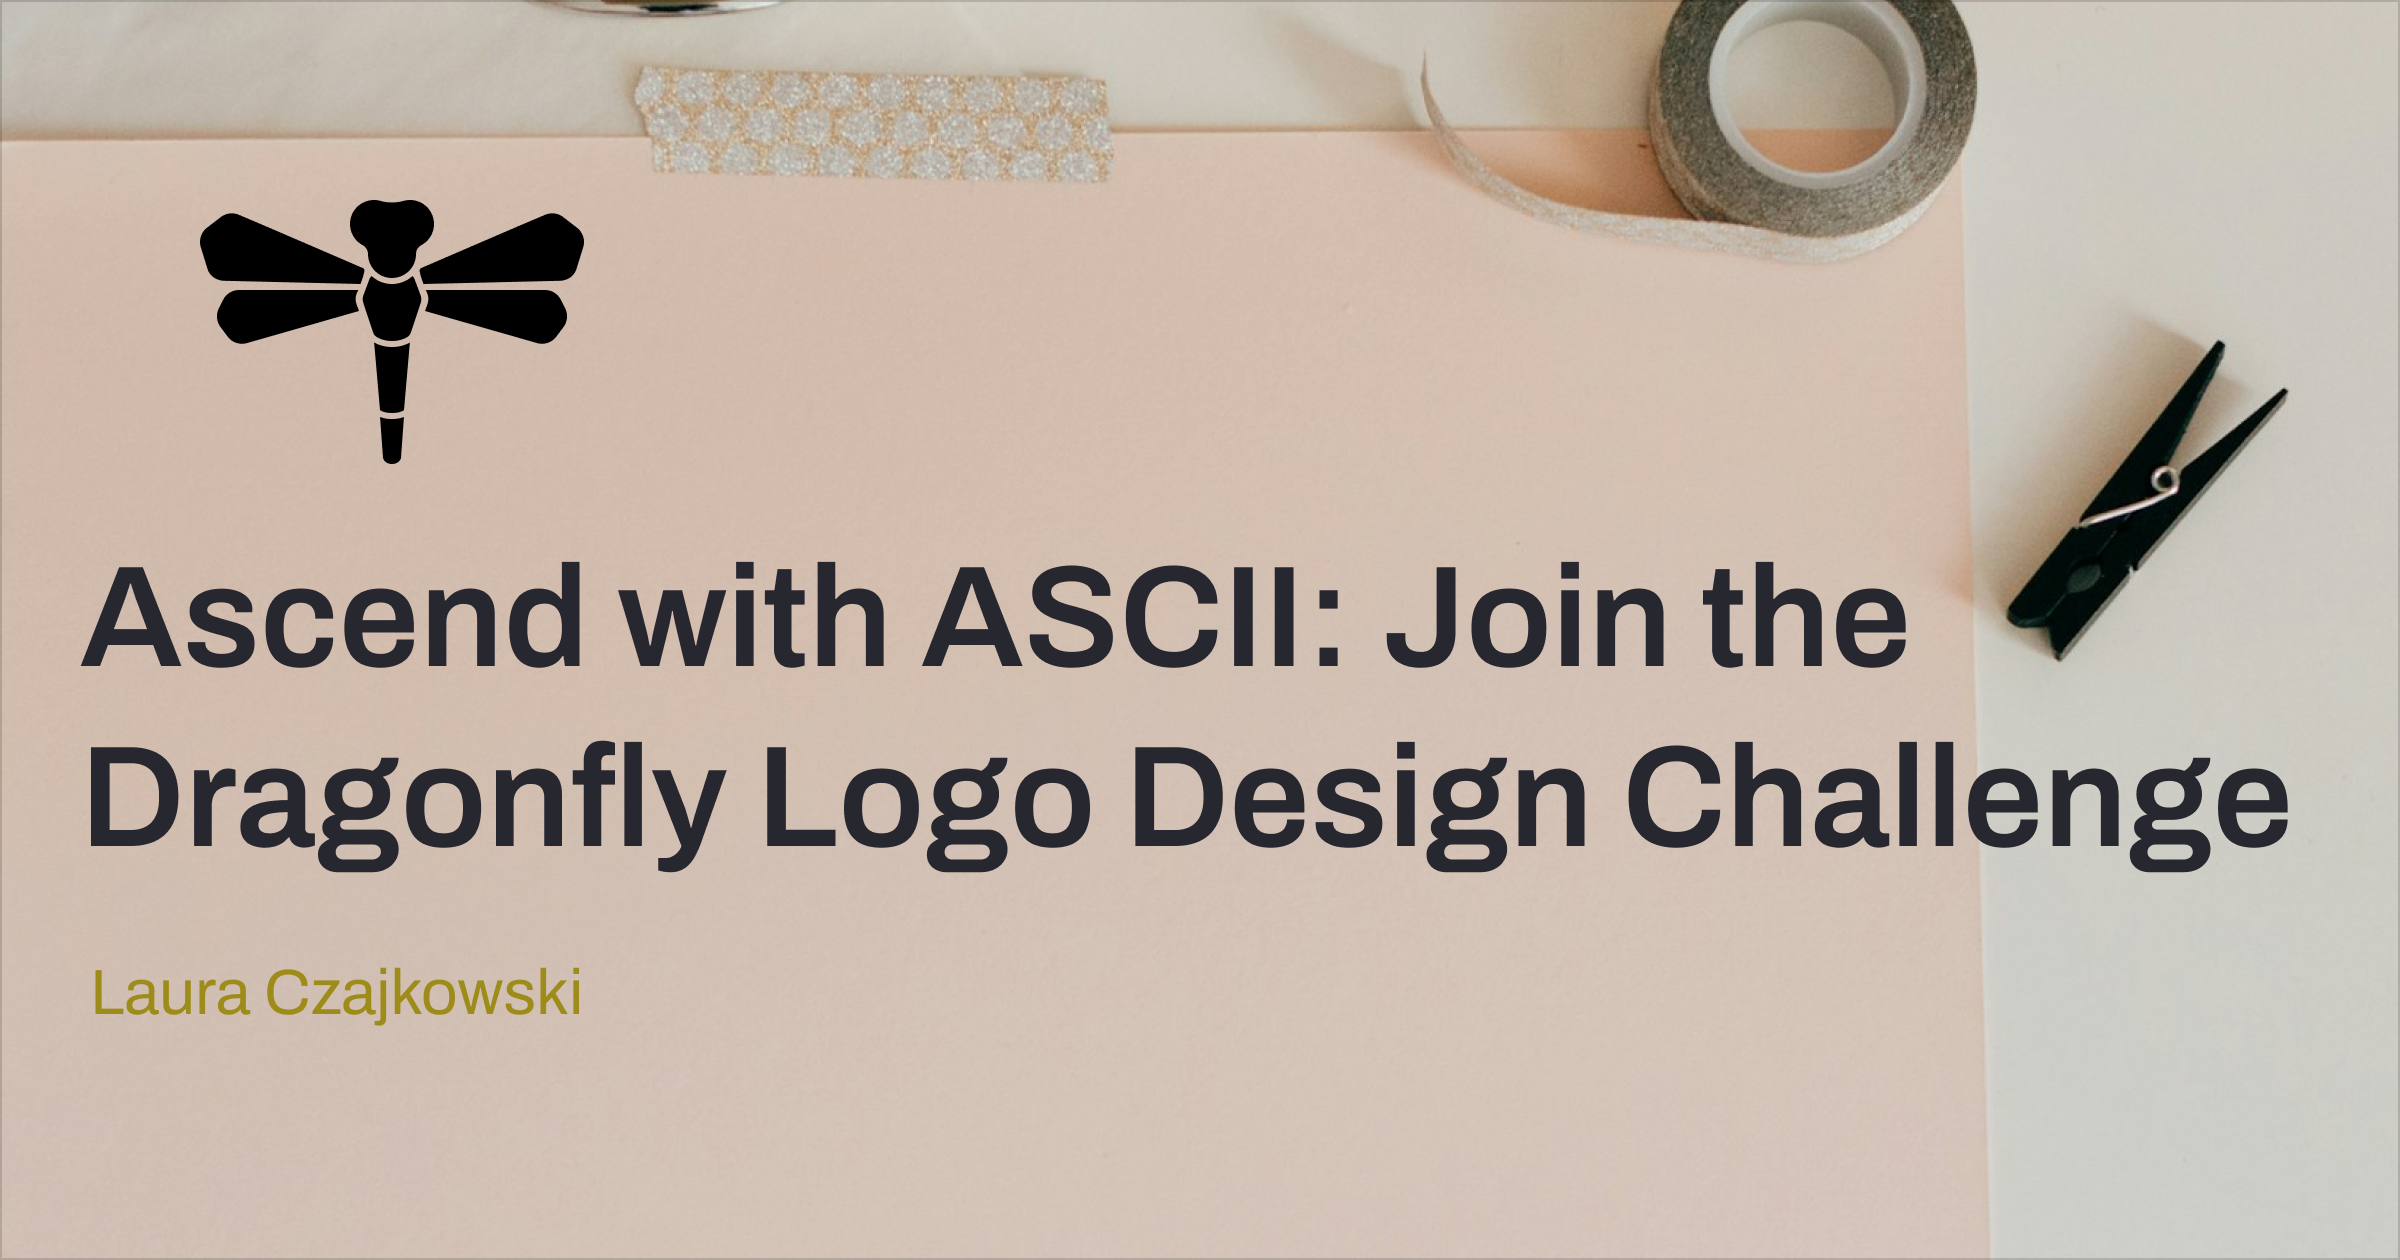 Ascend with ASCII: Join the Dragonfly Logo Design Challenge